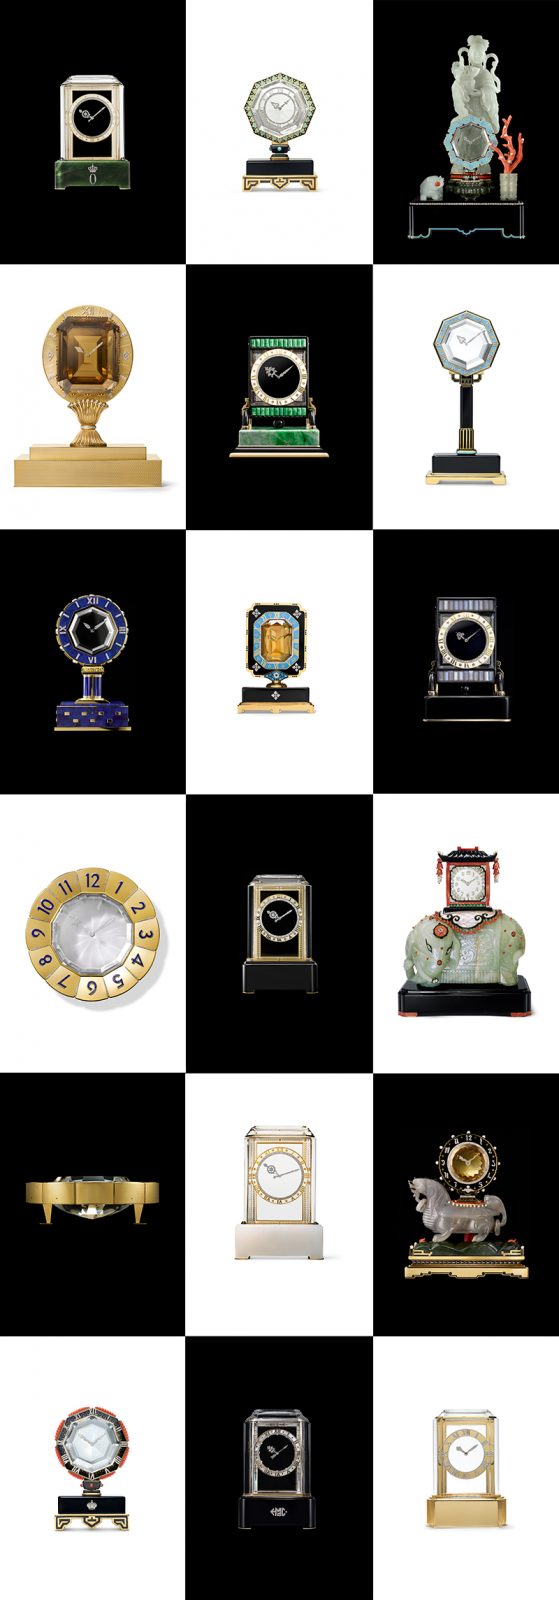 The mystery clocks in the Cartier collection 4